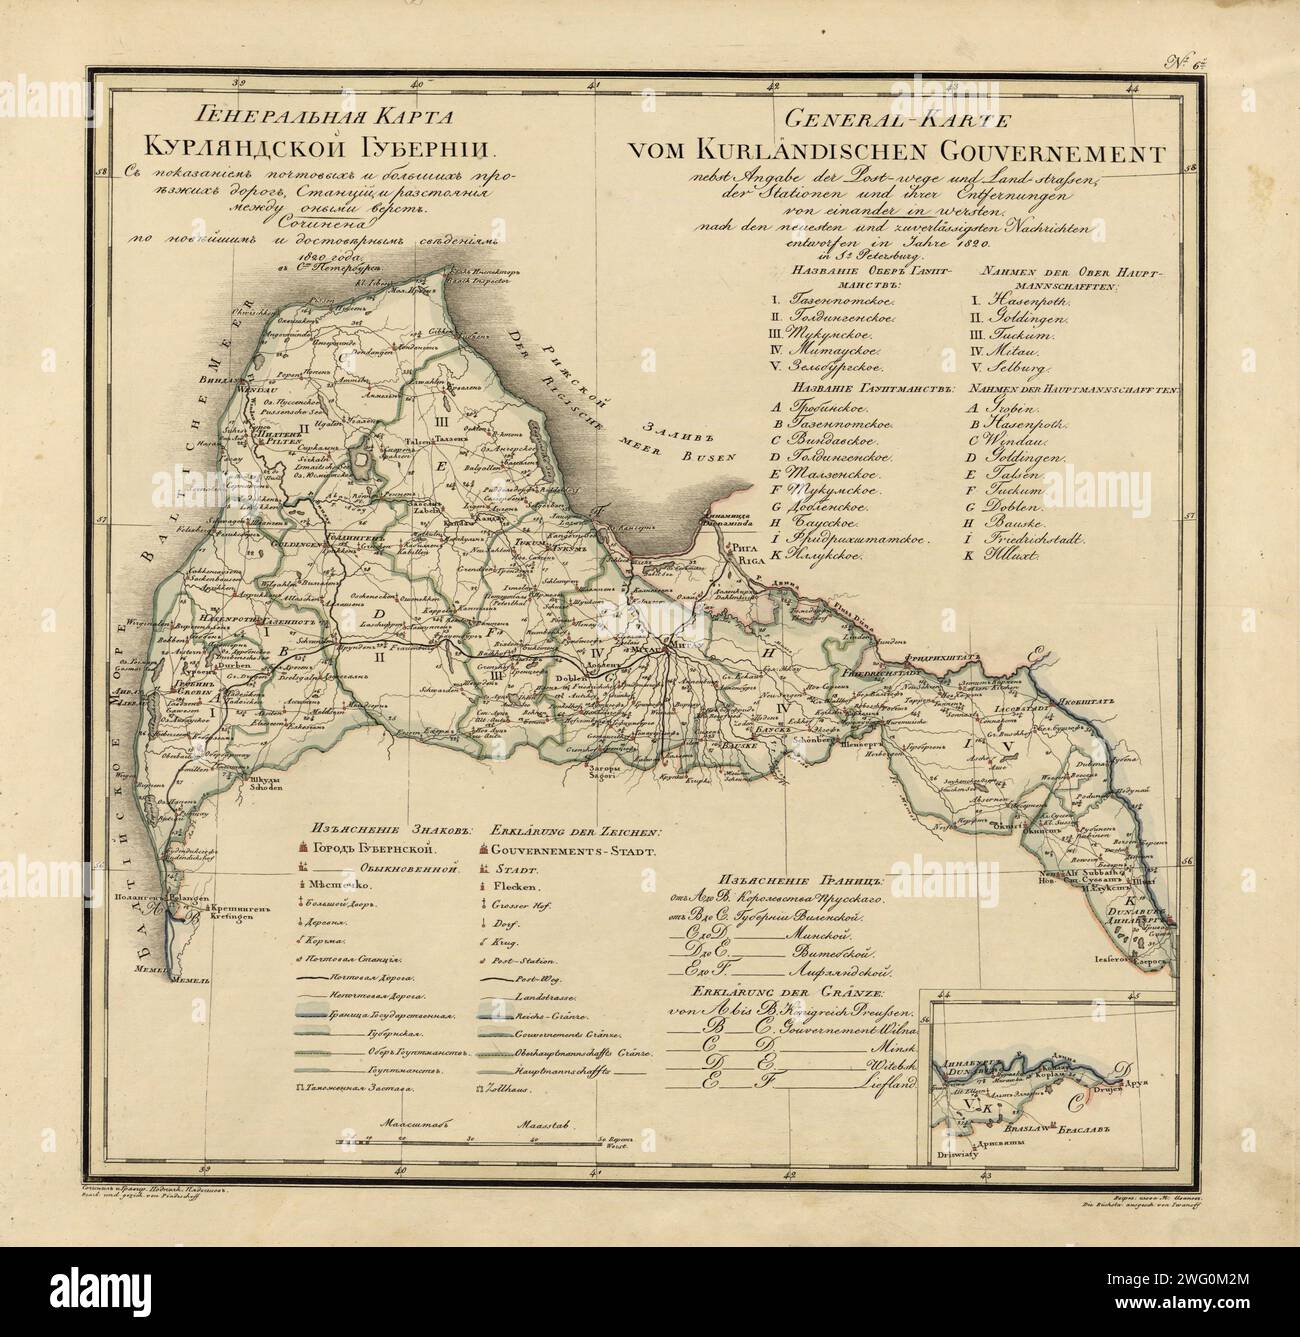 General Map of Courland Province: Showing Postal and Major Roads, Stations and the Distance in Versts between Them, 1820. This 1820 map of Courland Province is from a larger work, Geograficheskii atlas Rossiiskoi imperii, tsarstva Pol'skogo i velikogo kniazhestva Finliandskogo (Geographical atlas of the Russian Empire, the Kingdom of Poland, and the Grand Duchy of Finland), containing 60 maps of the Russian Empire. Compiled and engraved by Colonel V.P. Piadyshev, it reflects the detailed mapping carried out by Russian military cartographers in the first quarter of the 19th century. The map sho Stock Photo